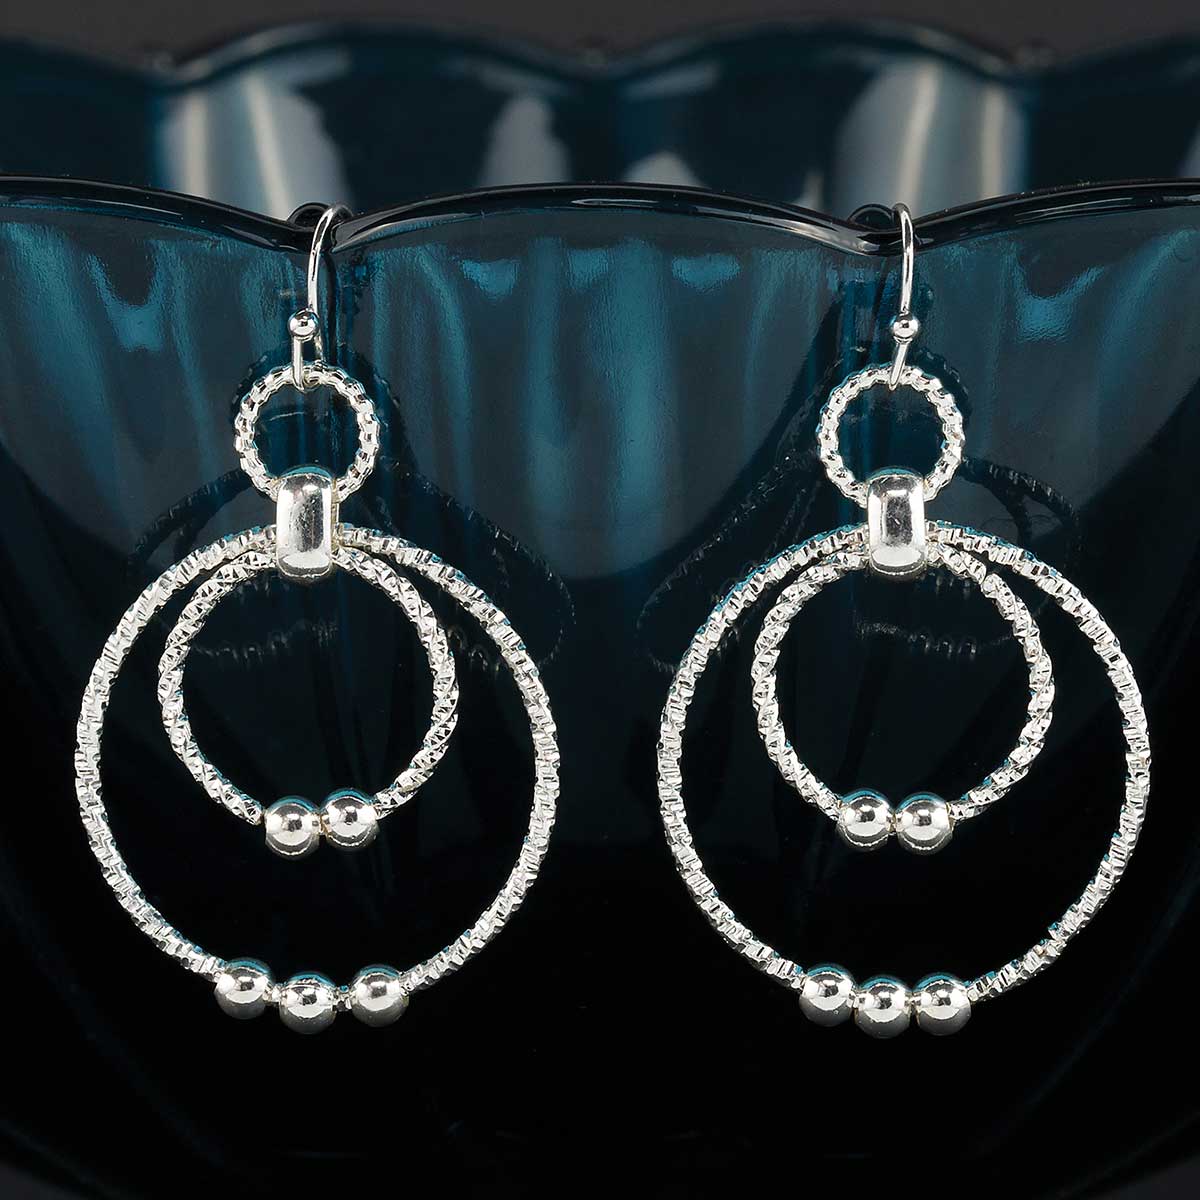 EARRINGS TWISTED DOUBLE CIRCLE 1.5IN X 2IN SHINY SILVER